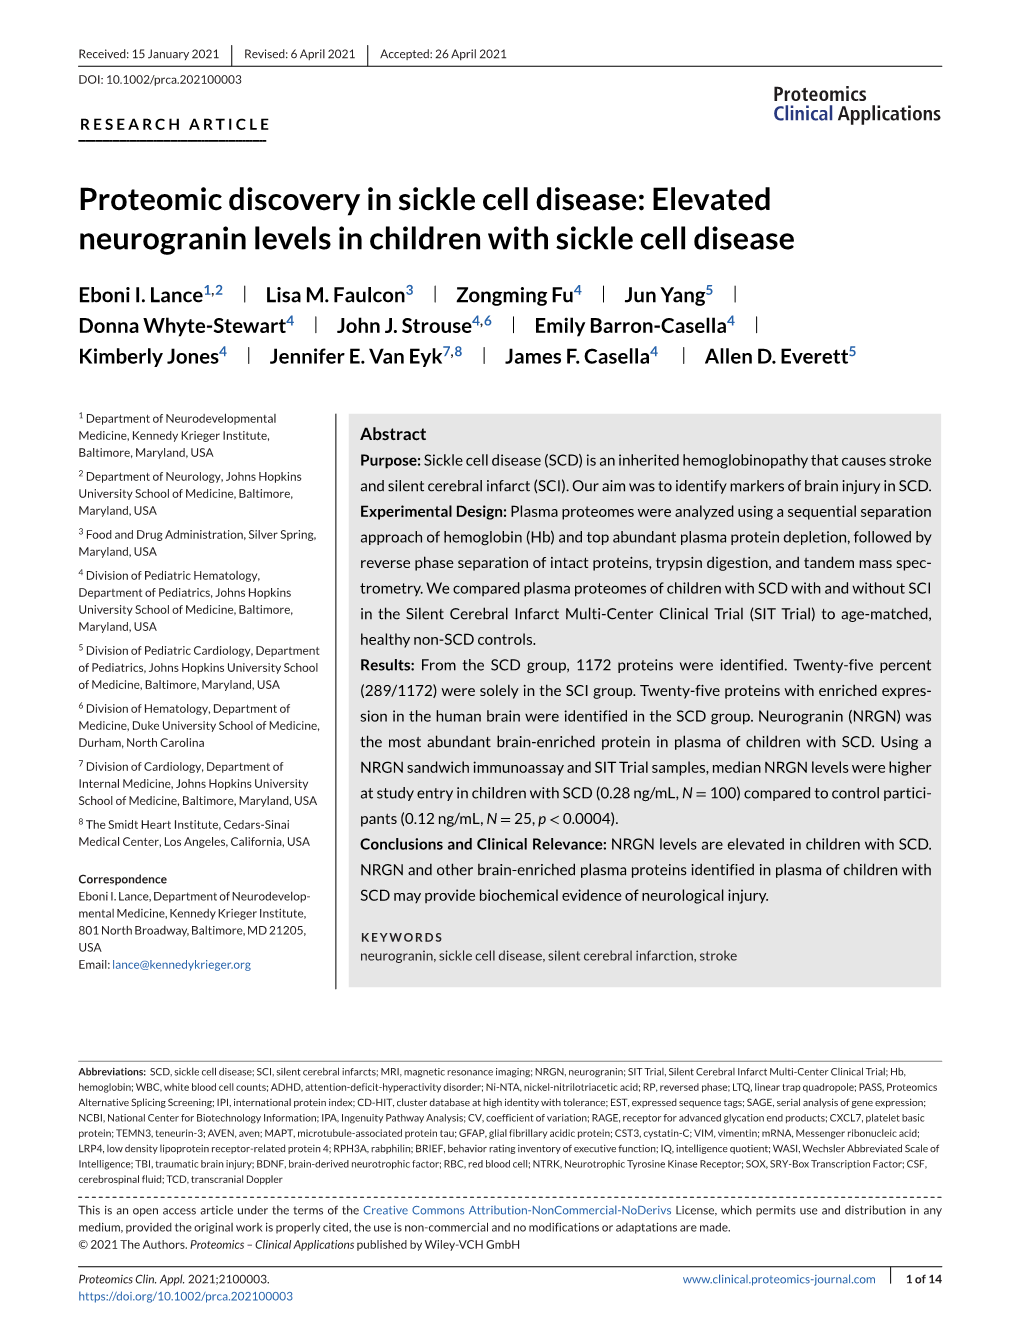 Proteomic Discovery in Sickle Cell Disease: Elevated Neurogranin Levels in Children with Sickle Cell Disease